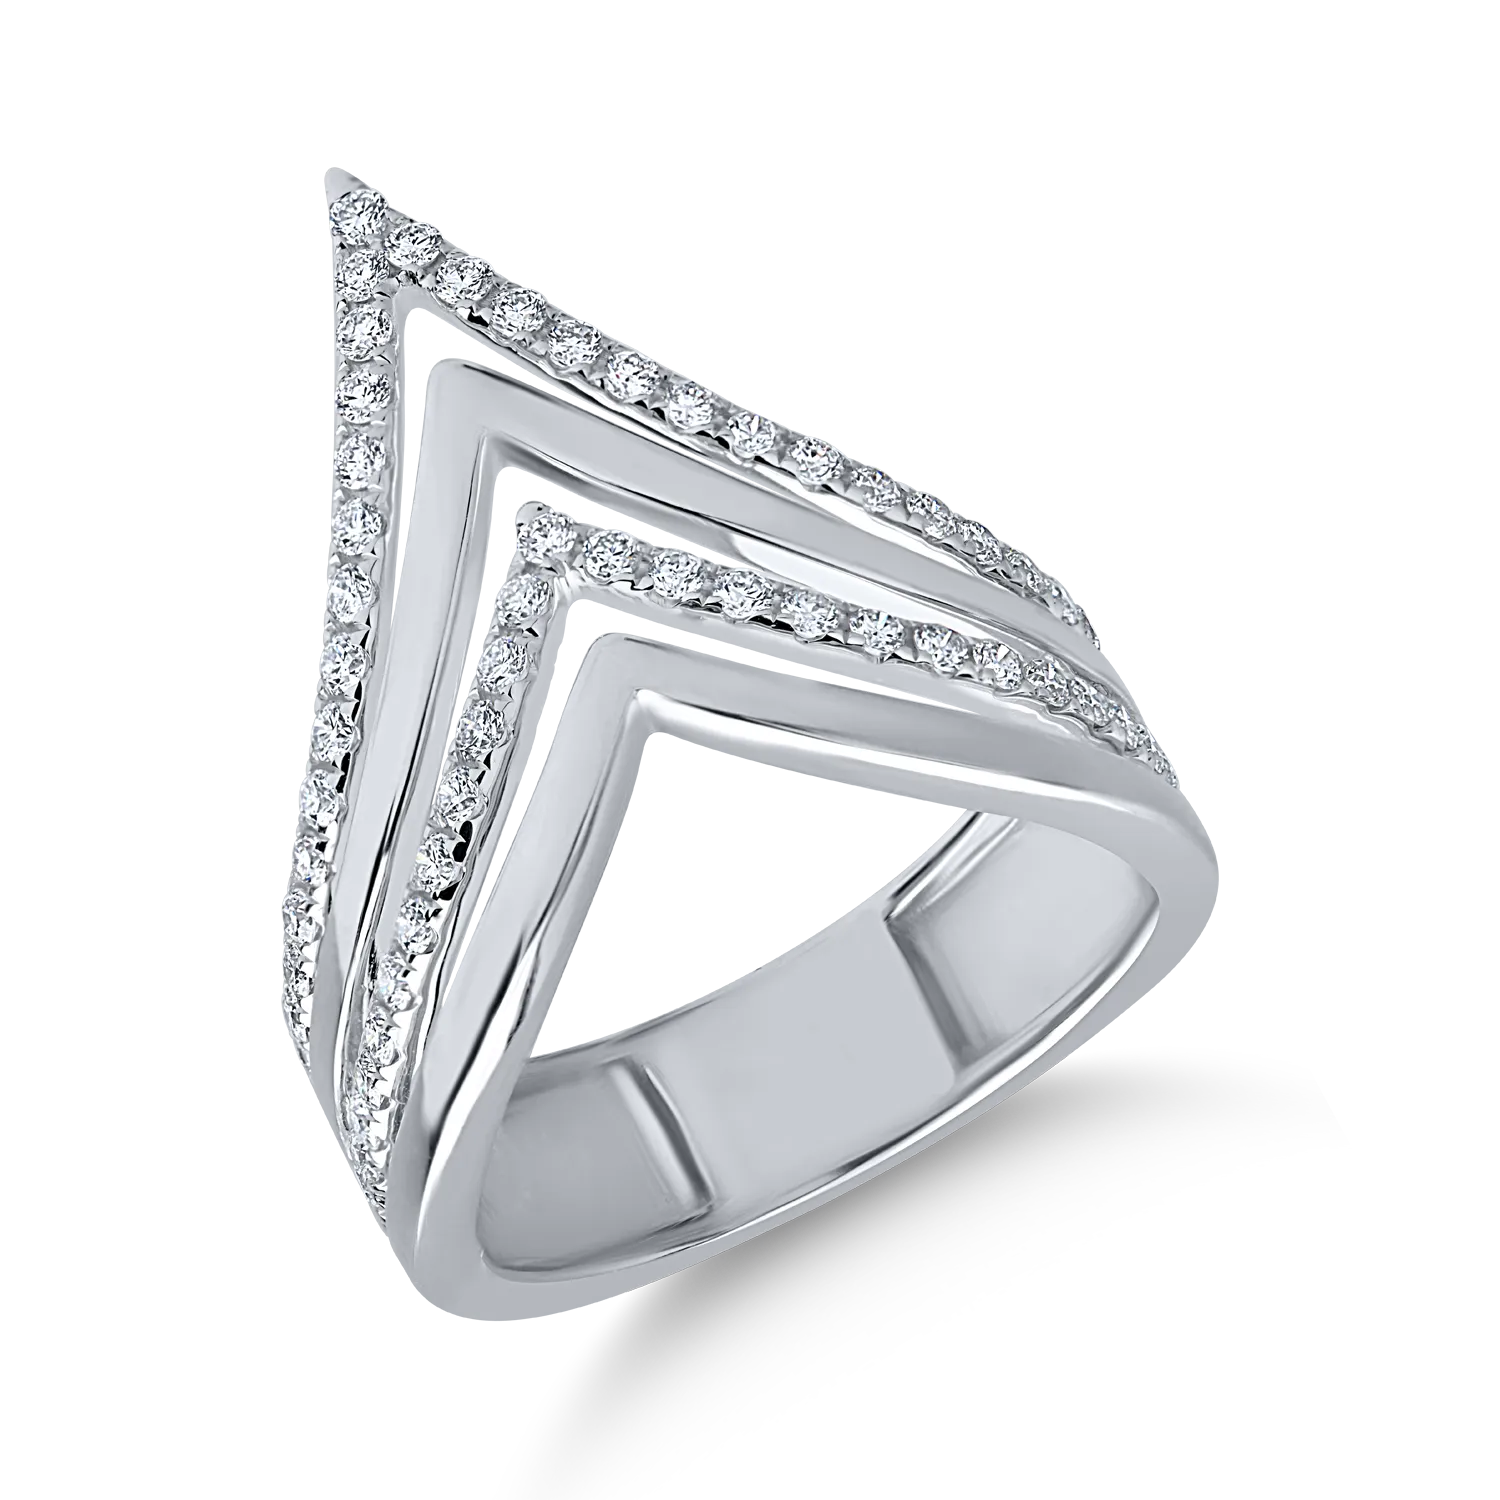 White gold ring with 0.6ct diamonds